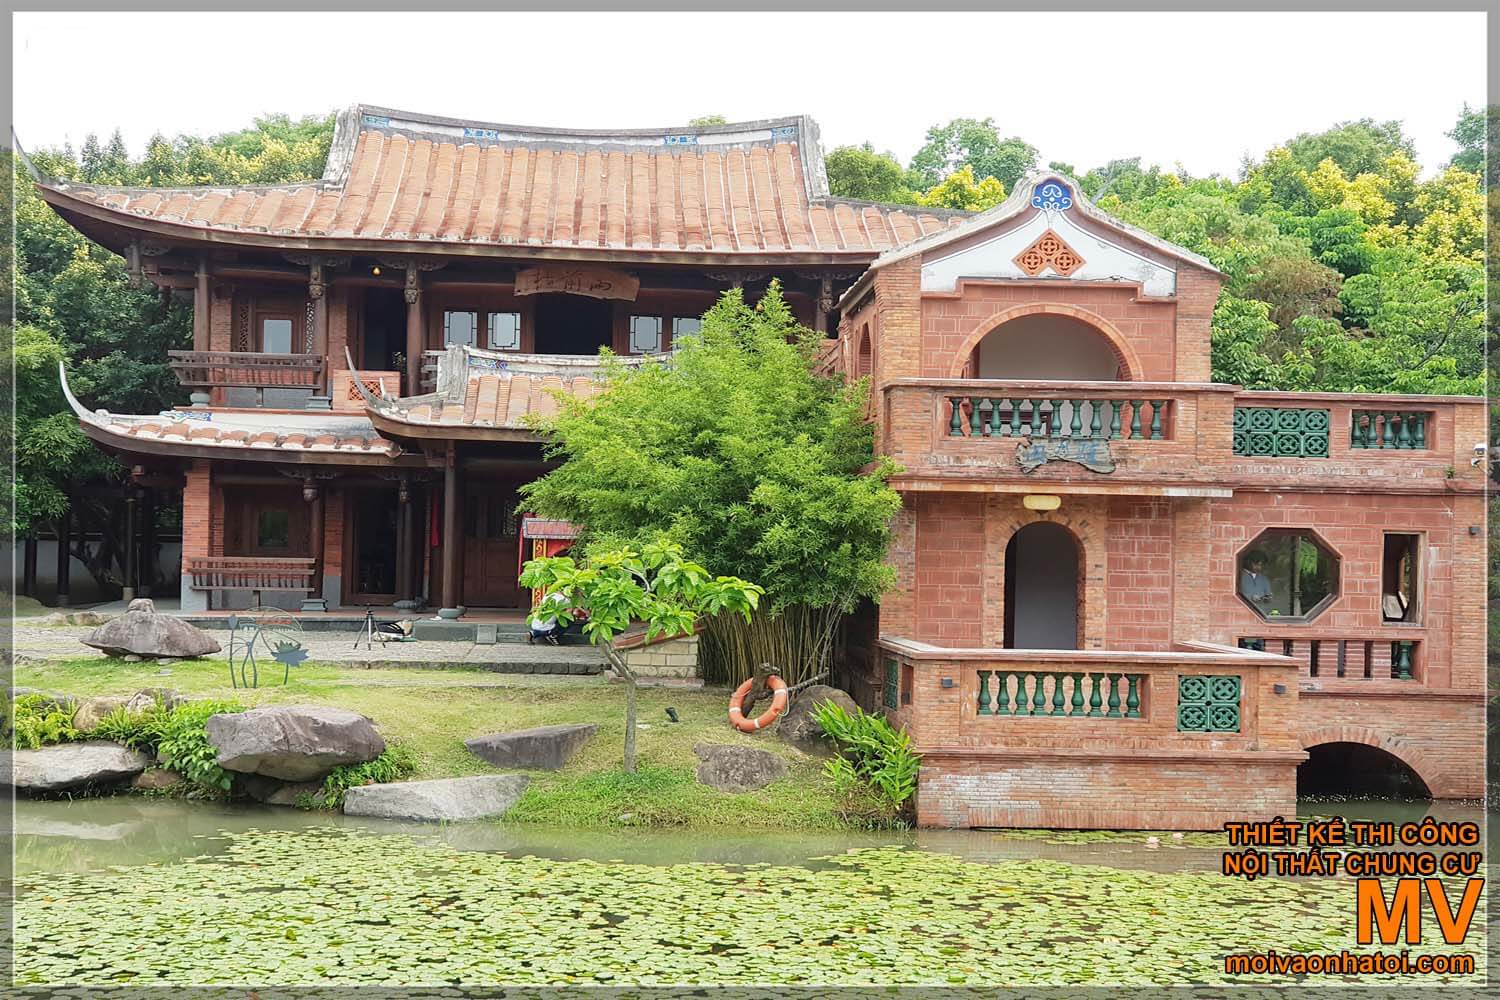 Chinese antique house model